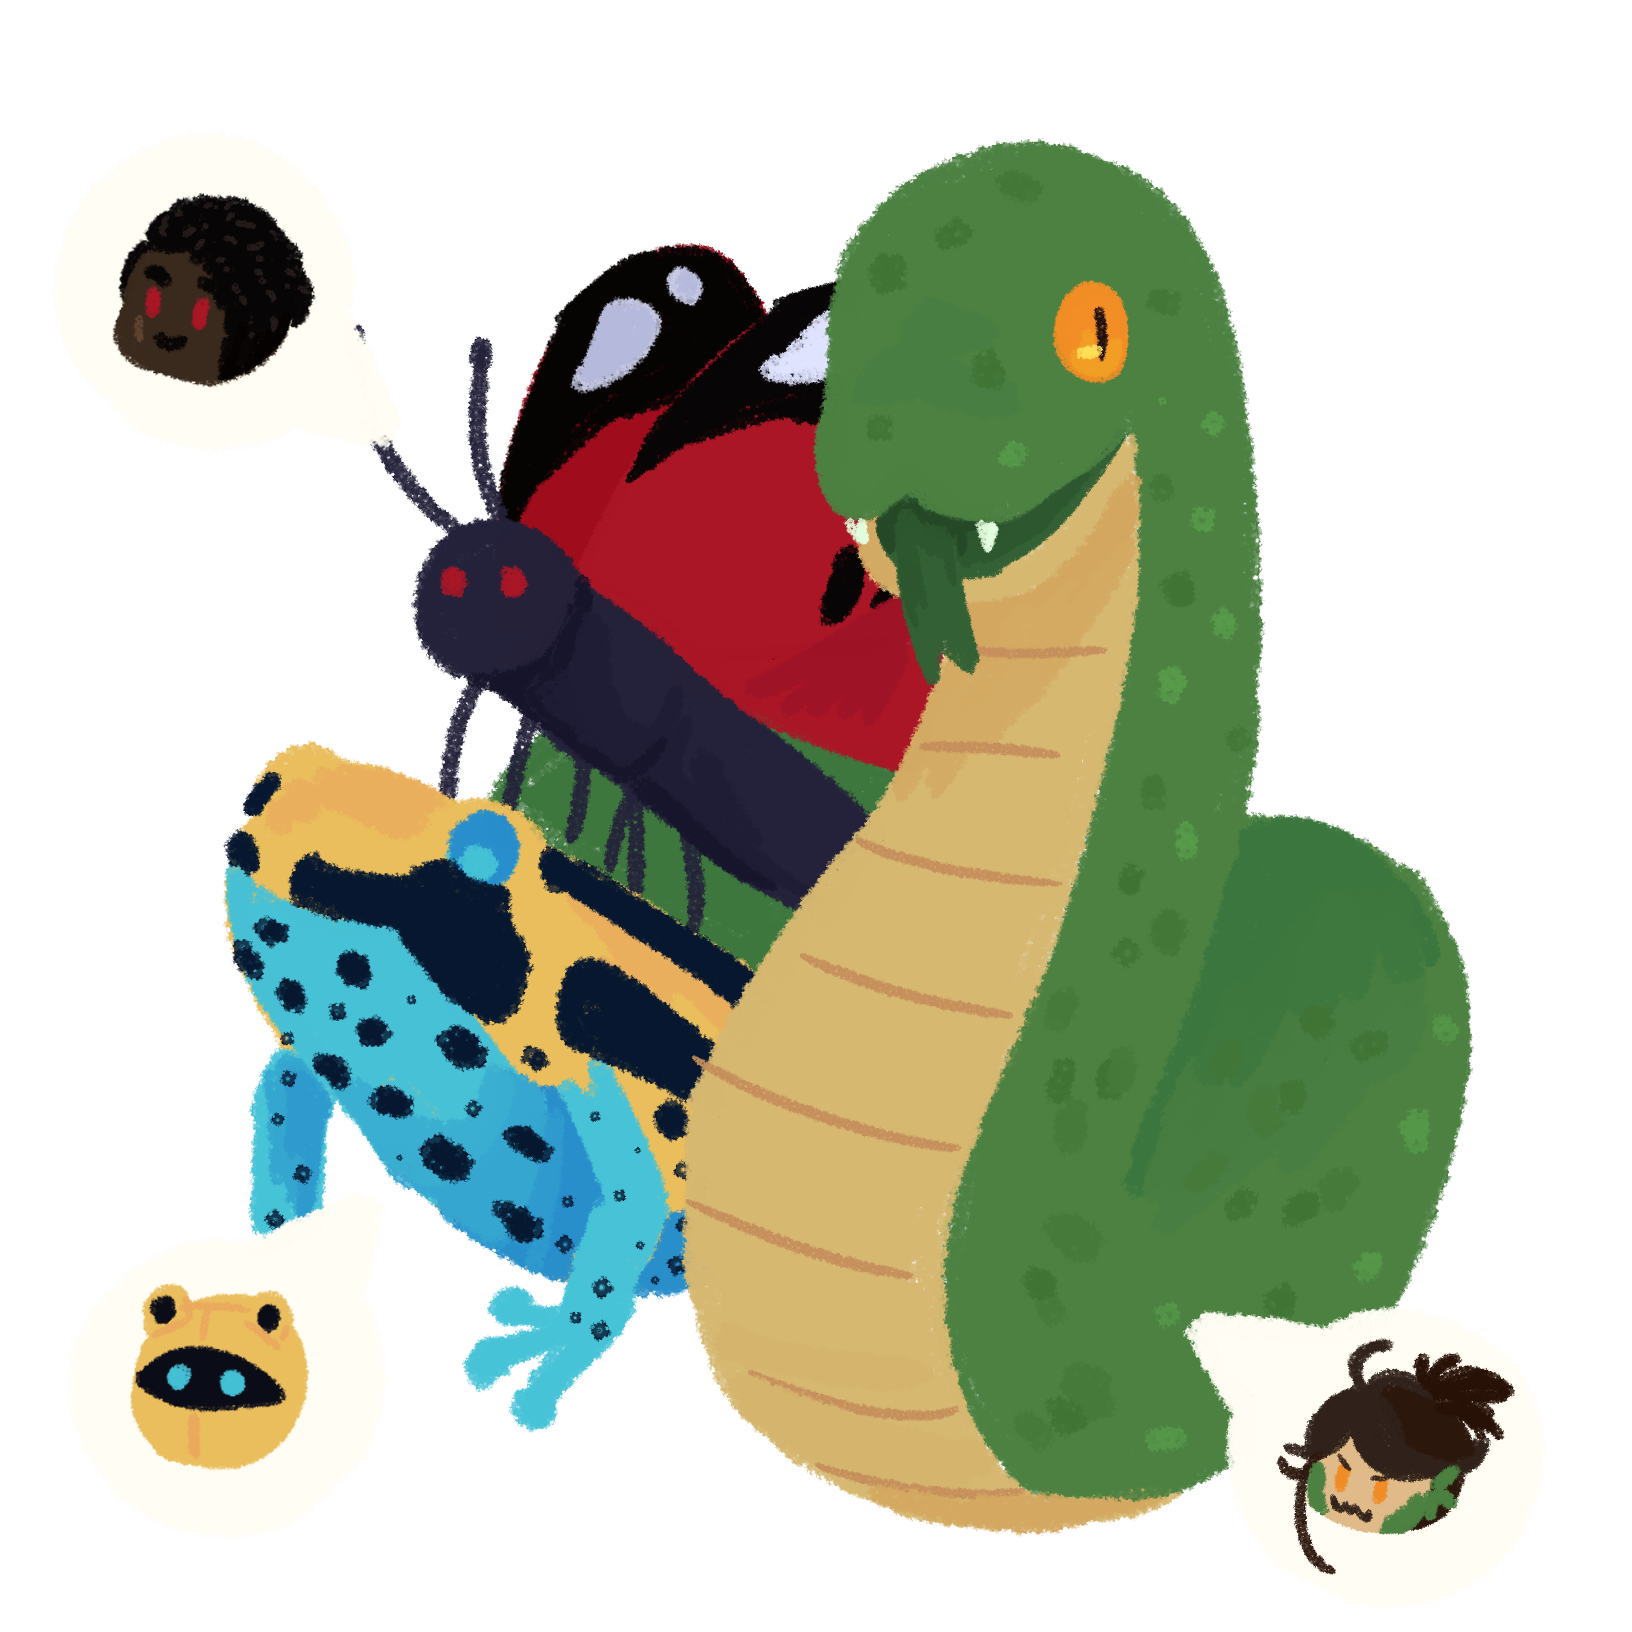 a drawing of a frog, a butterfly, and a snake. there are speech bubble correlating the animals as roxanne, reiner, and rinu.